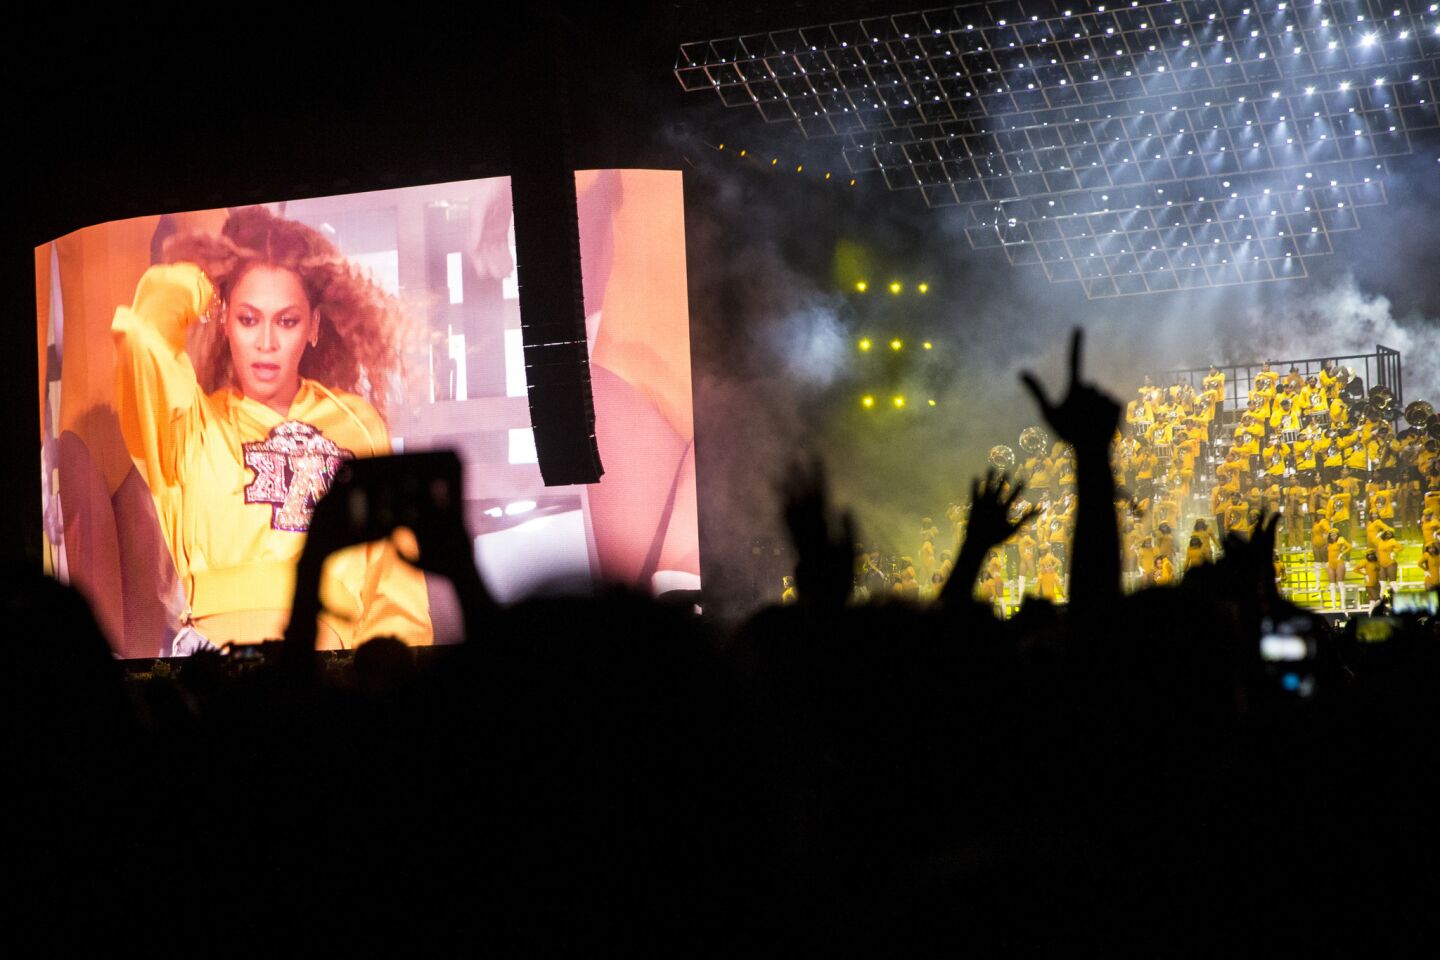 Beyoncé closes the night with an electric performance.